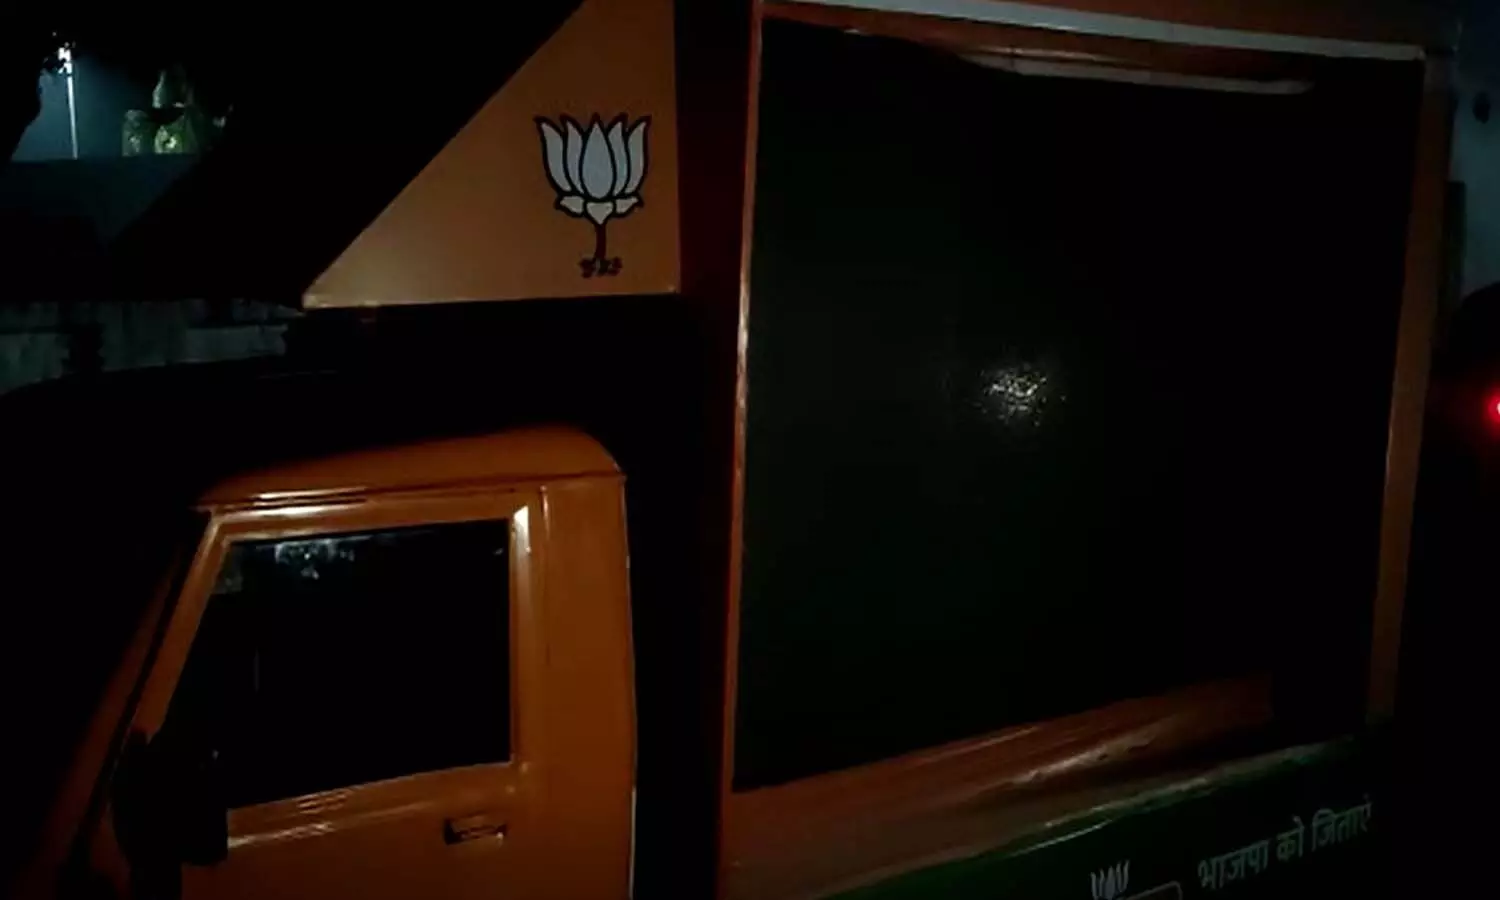 UP Election 2022: BJP candidate Mriganka Singhs campaign vehicle attacked by unknown people, driver injured in assault